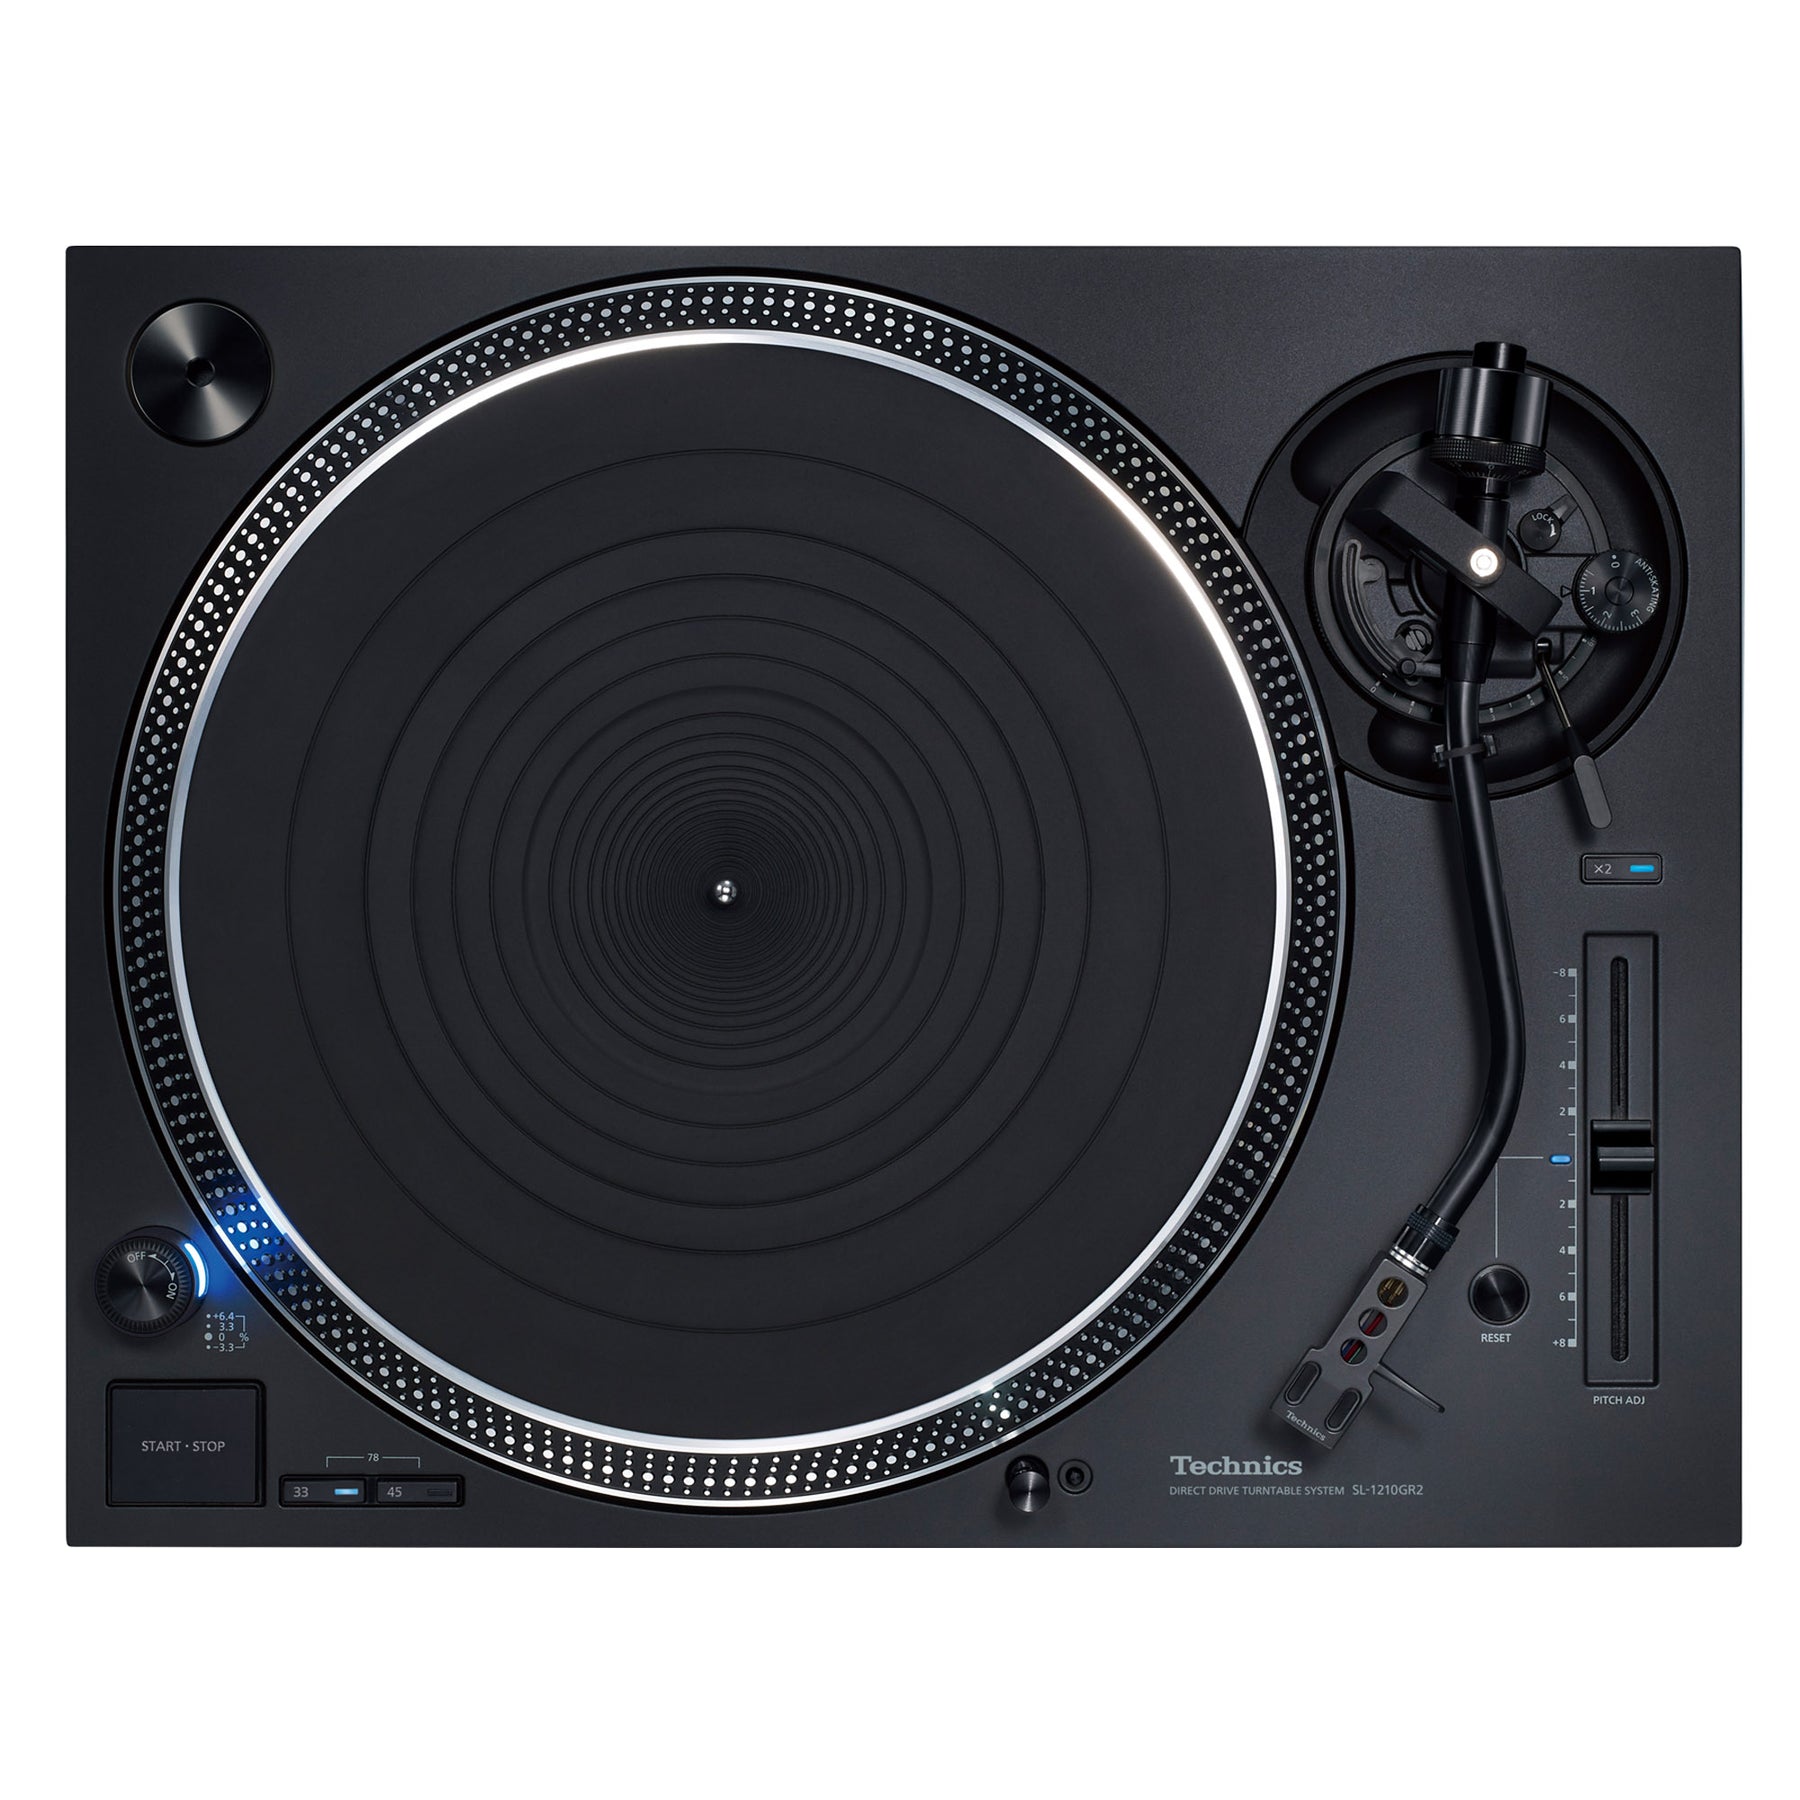 Direct Drive Turntable System II - SL-1210GR2